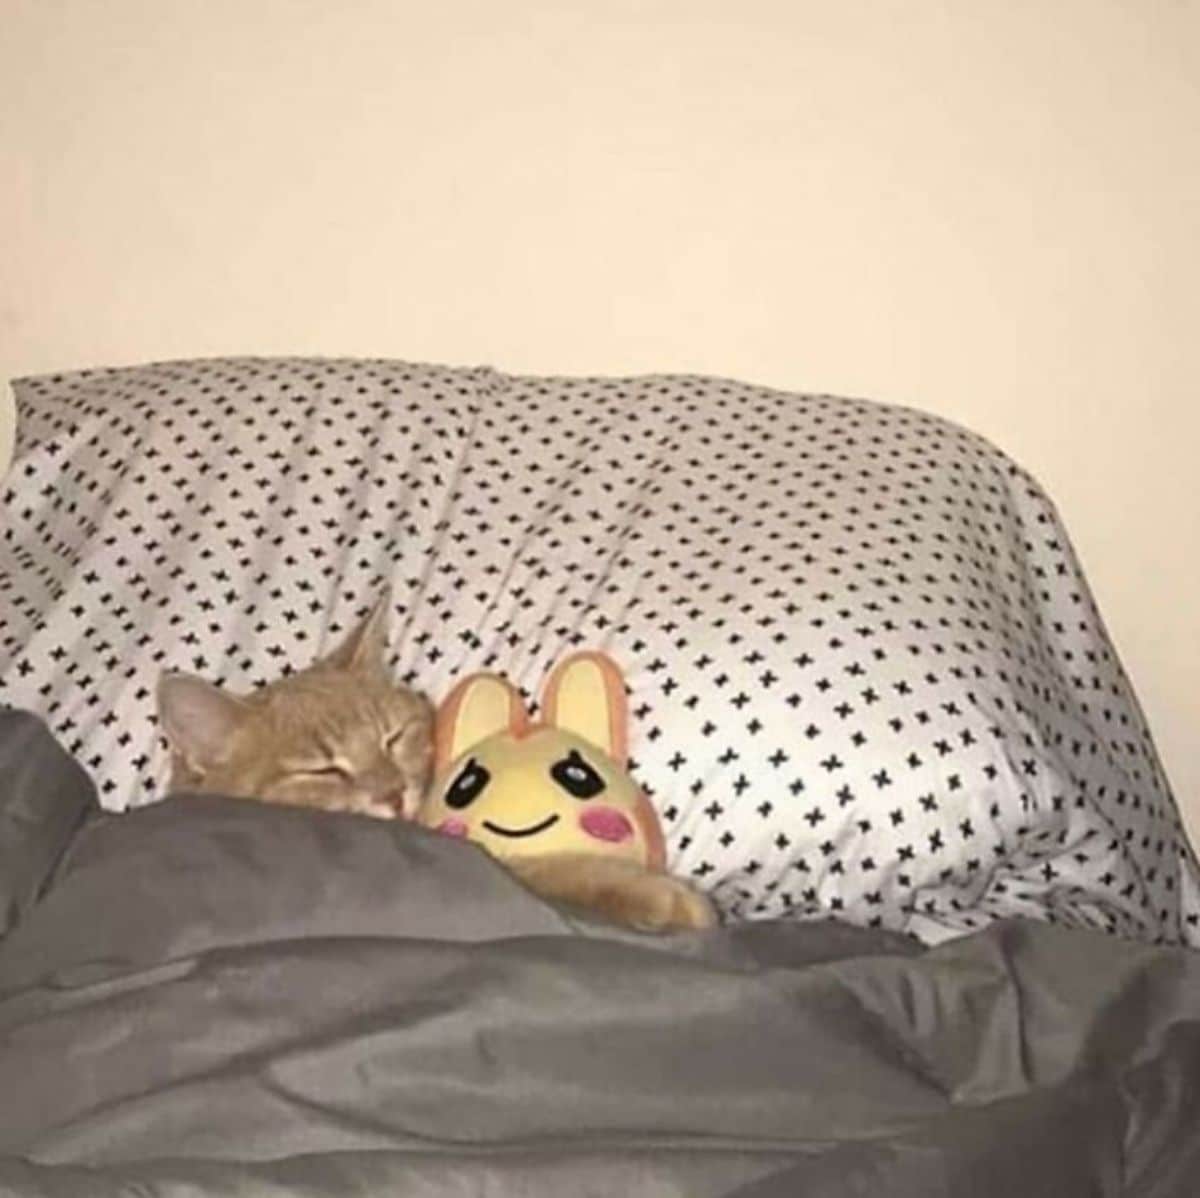 orange cat cuddling with a yellow and orange stuffed toy on a white and black pillow under a brown blanket